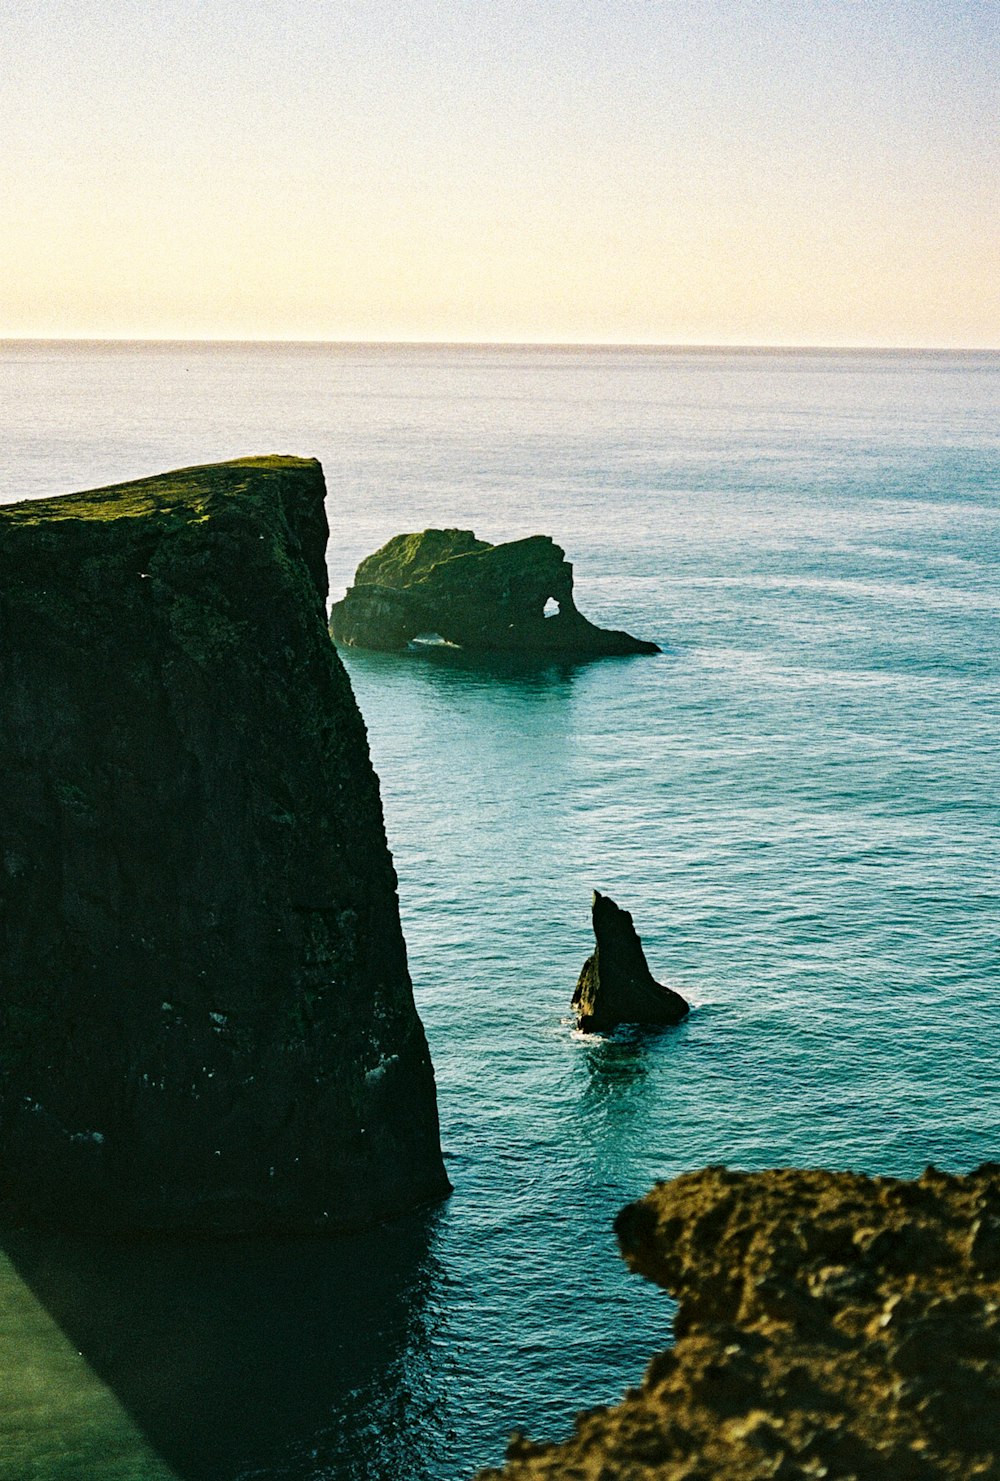 black rock formation on sea during daytime